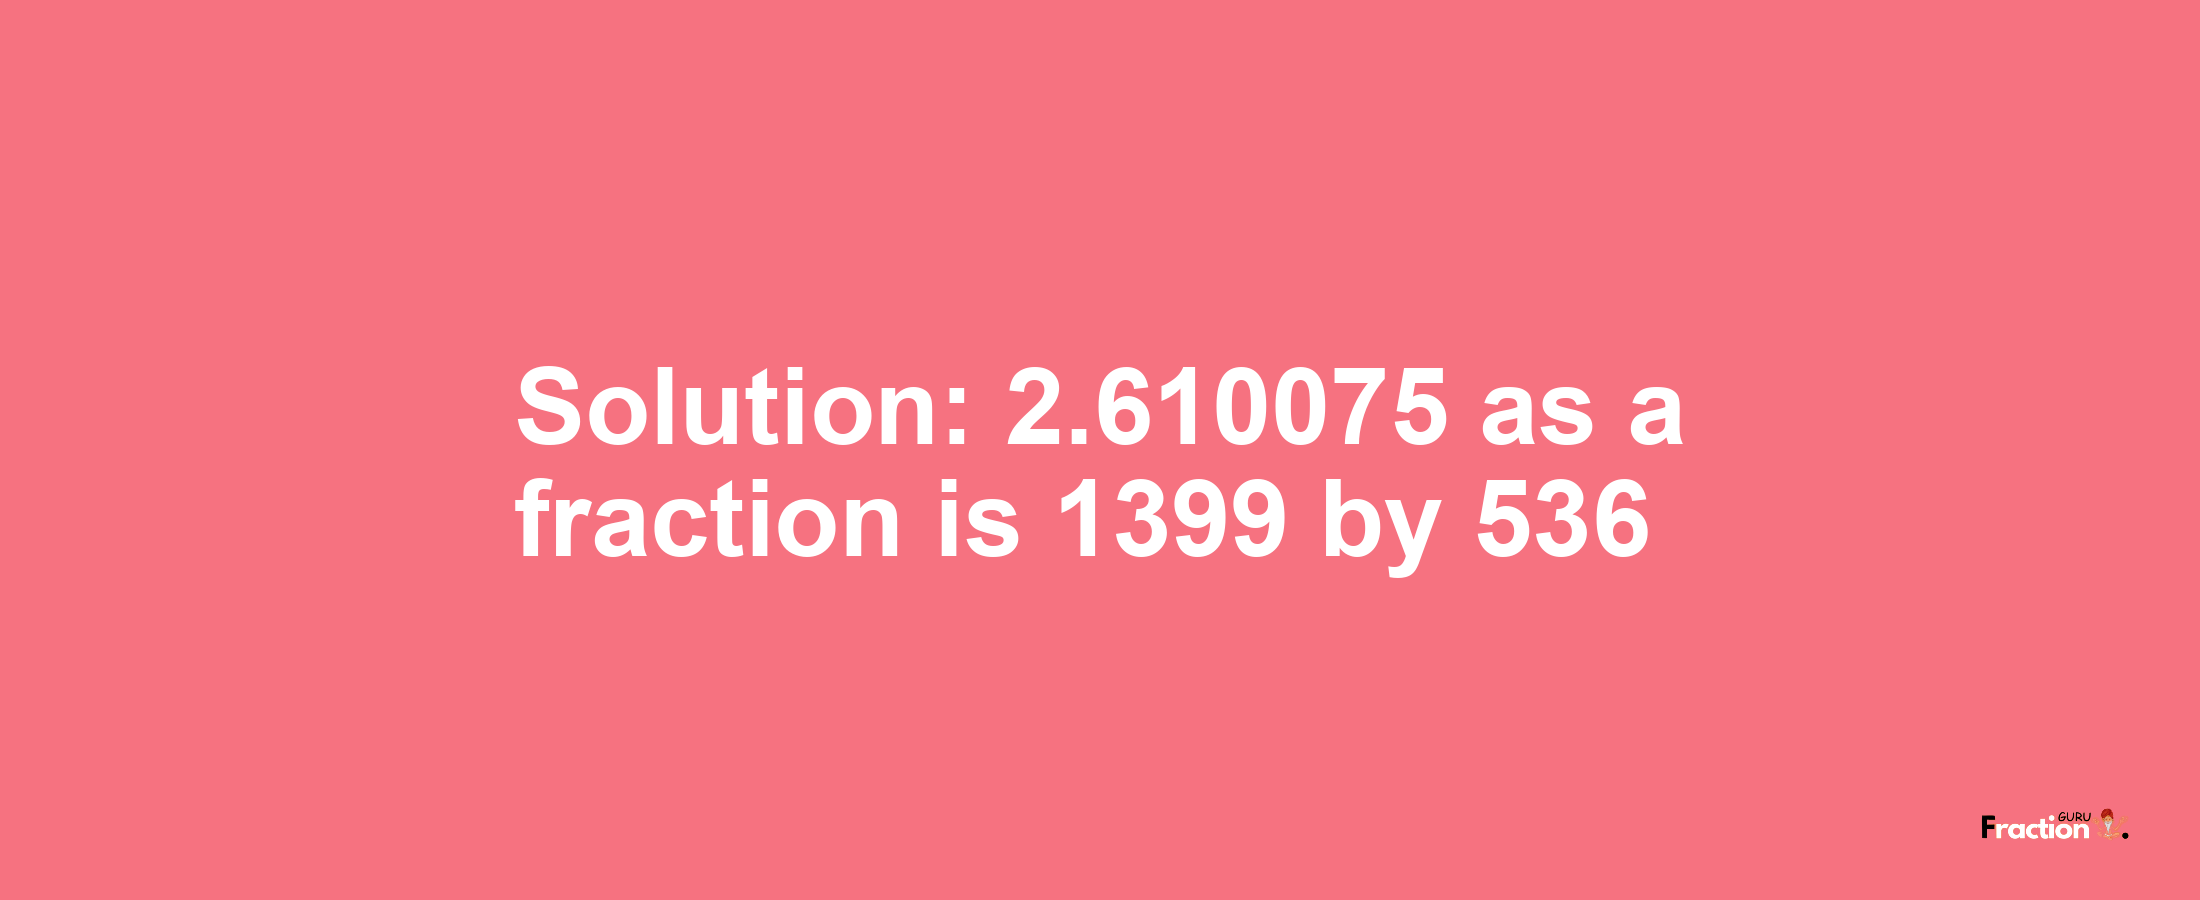 Solution:2.610075 as a fraction is 1399/536